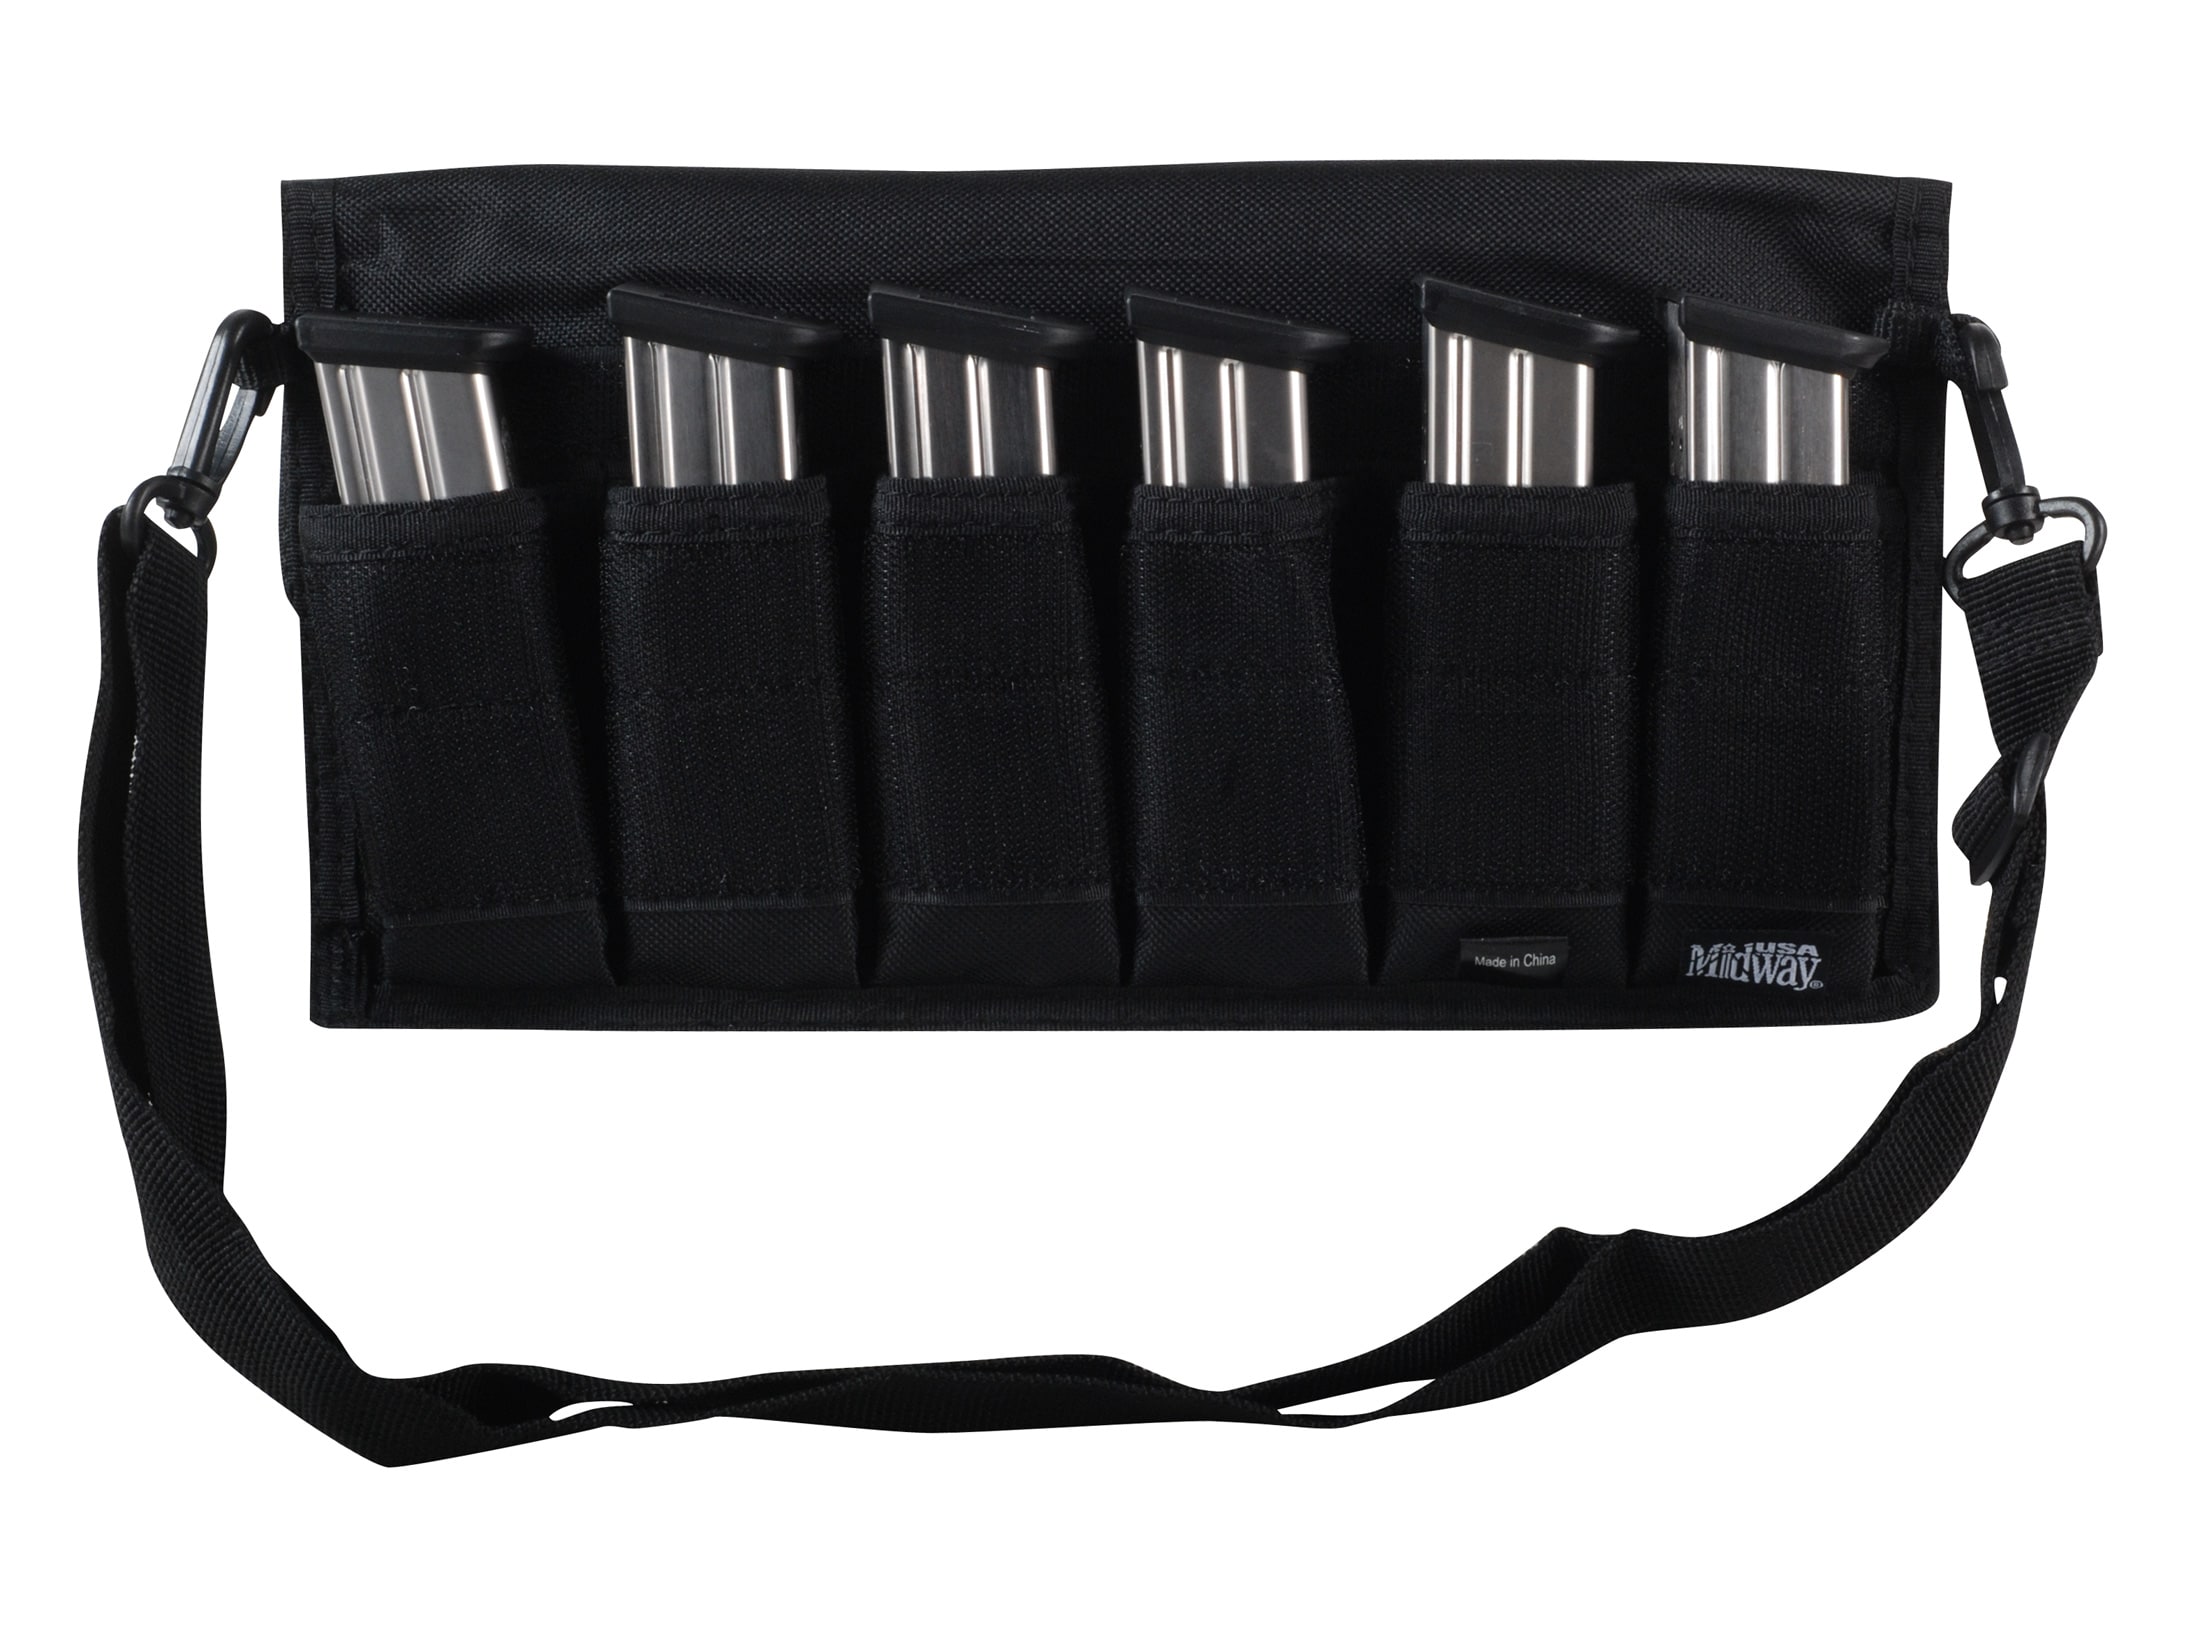 T-Gear Tactical MOLLE Double Pistol Magazine Pouch Double Stack Duty Gear ODG 